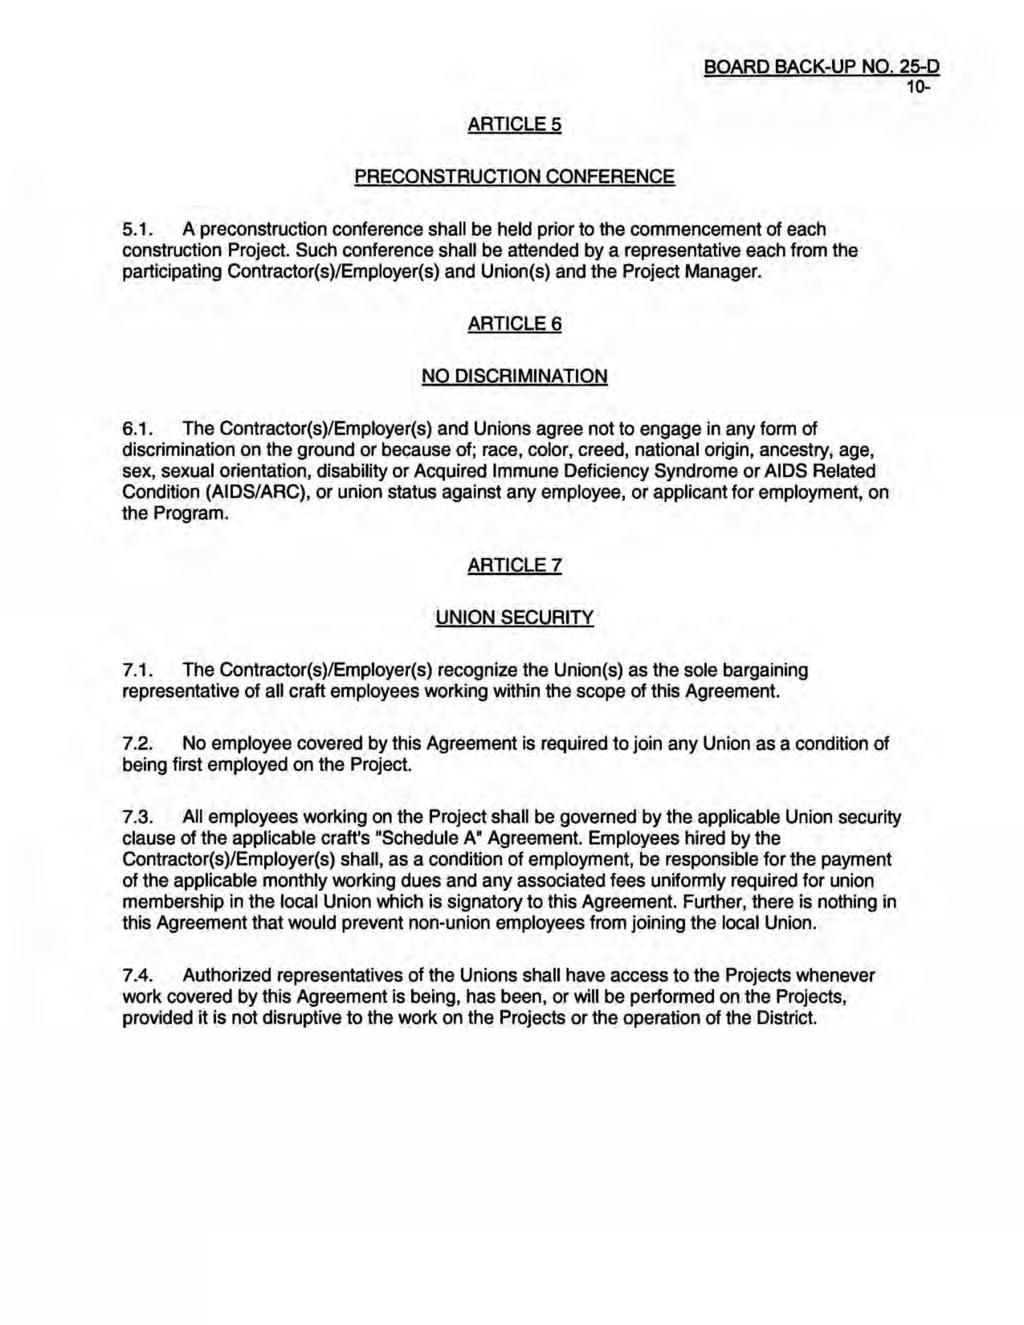 BOARD BACK-UP NO. 25-D 10- ARTICLE 5 PRECONSTRUCTION CONFERENCE 5.1. A preconstruction conference shall be held prior to the commencement of each construction Project.